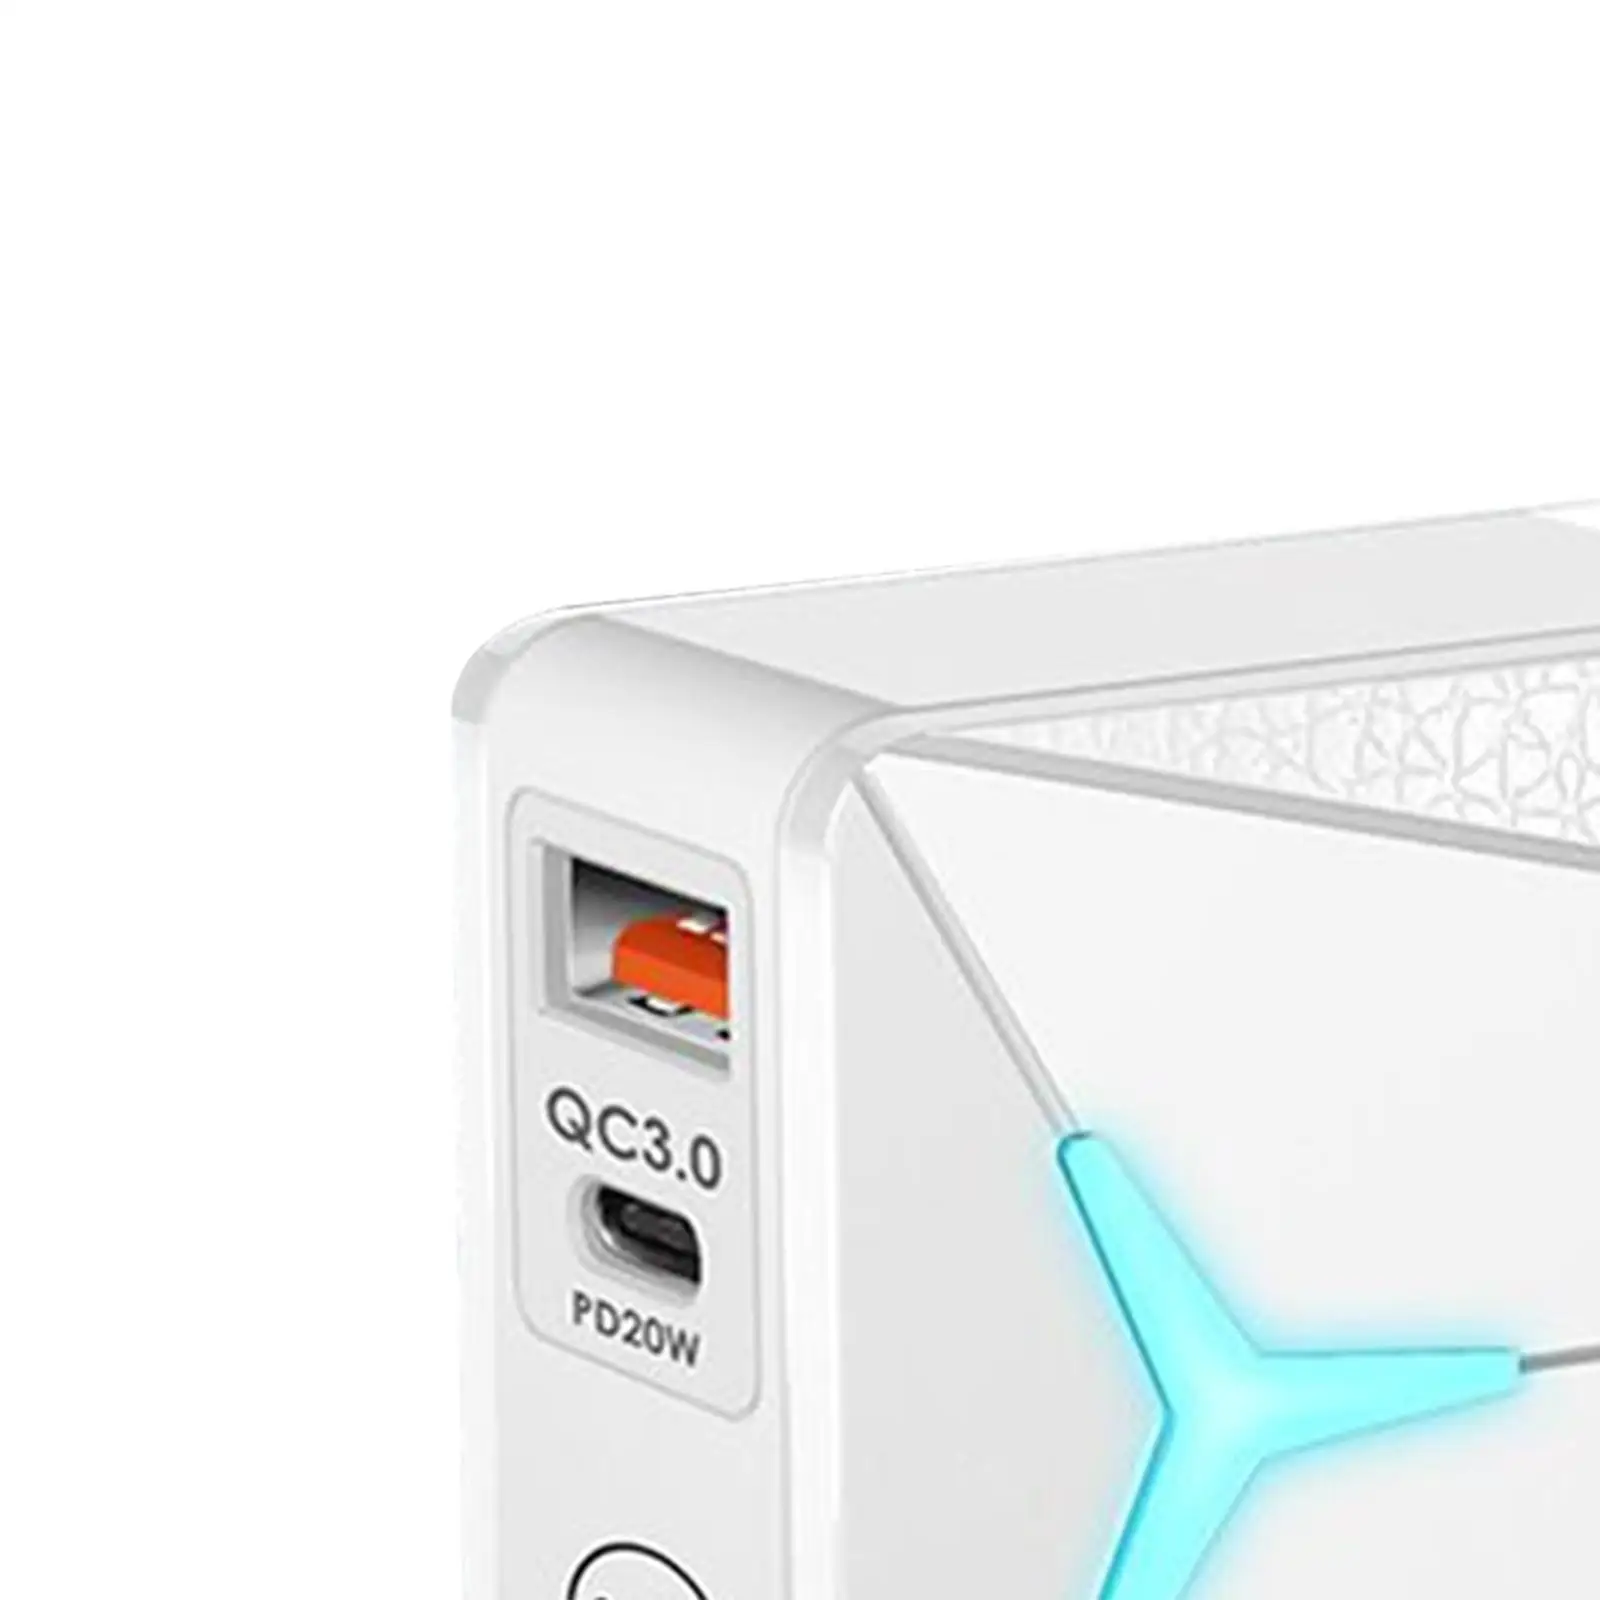 Phone Charger Adapter Compact Fast Charging 5V / 4A 9V / 2.4A 12V / 1.8A Dual Port Converter USB Wall Charger for Home Use White